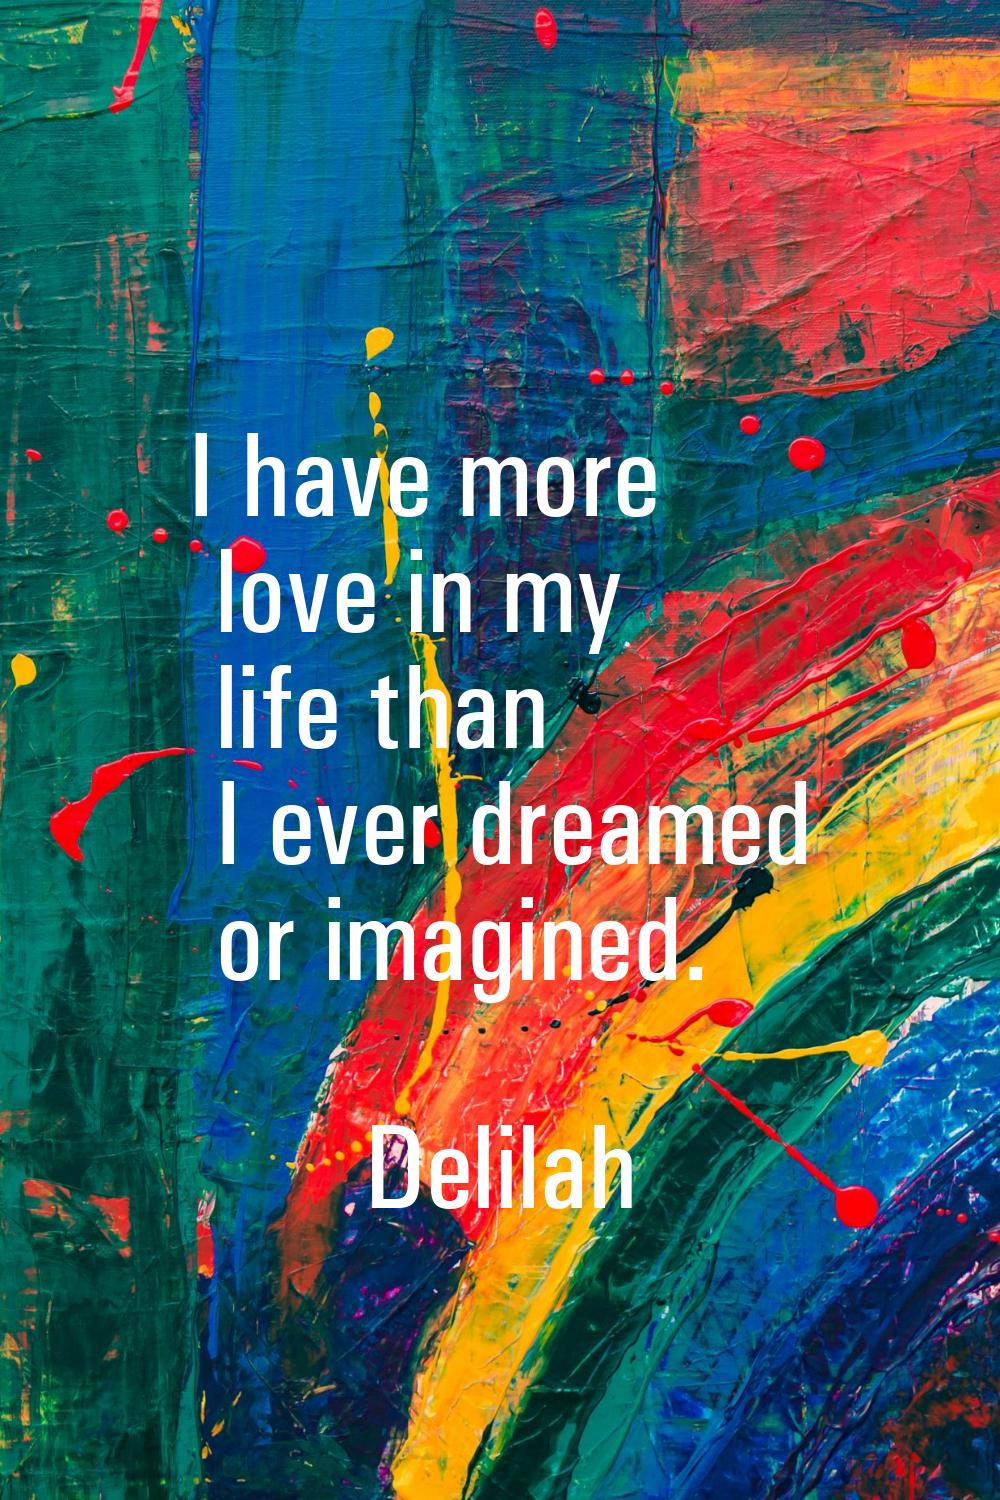 I have more love in my life than I ever dreamed or imagined.